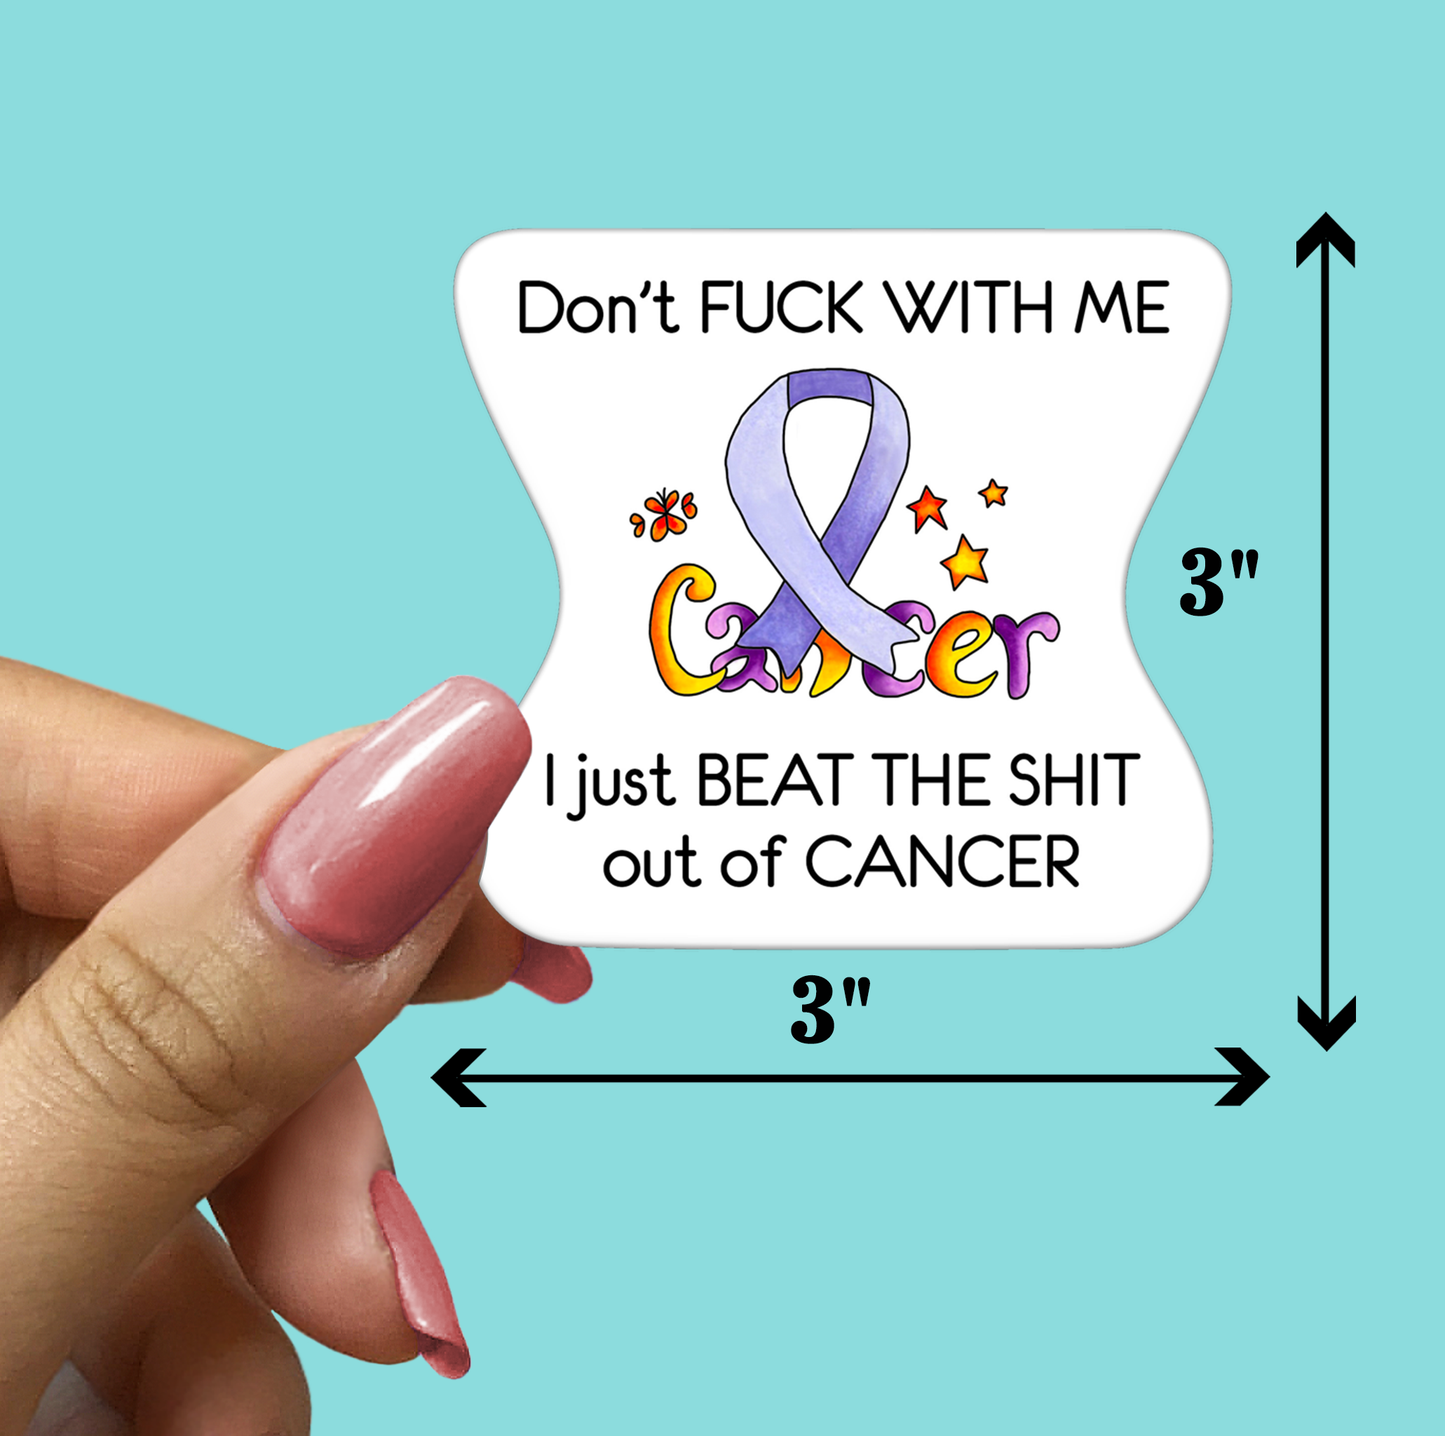 Don't FUCK WITH ME Cancer STICKER